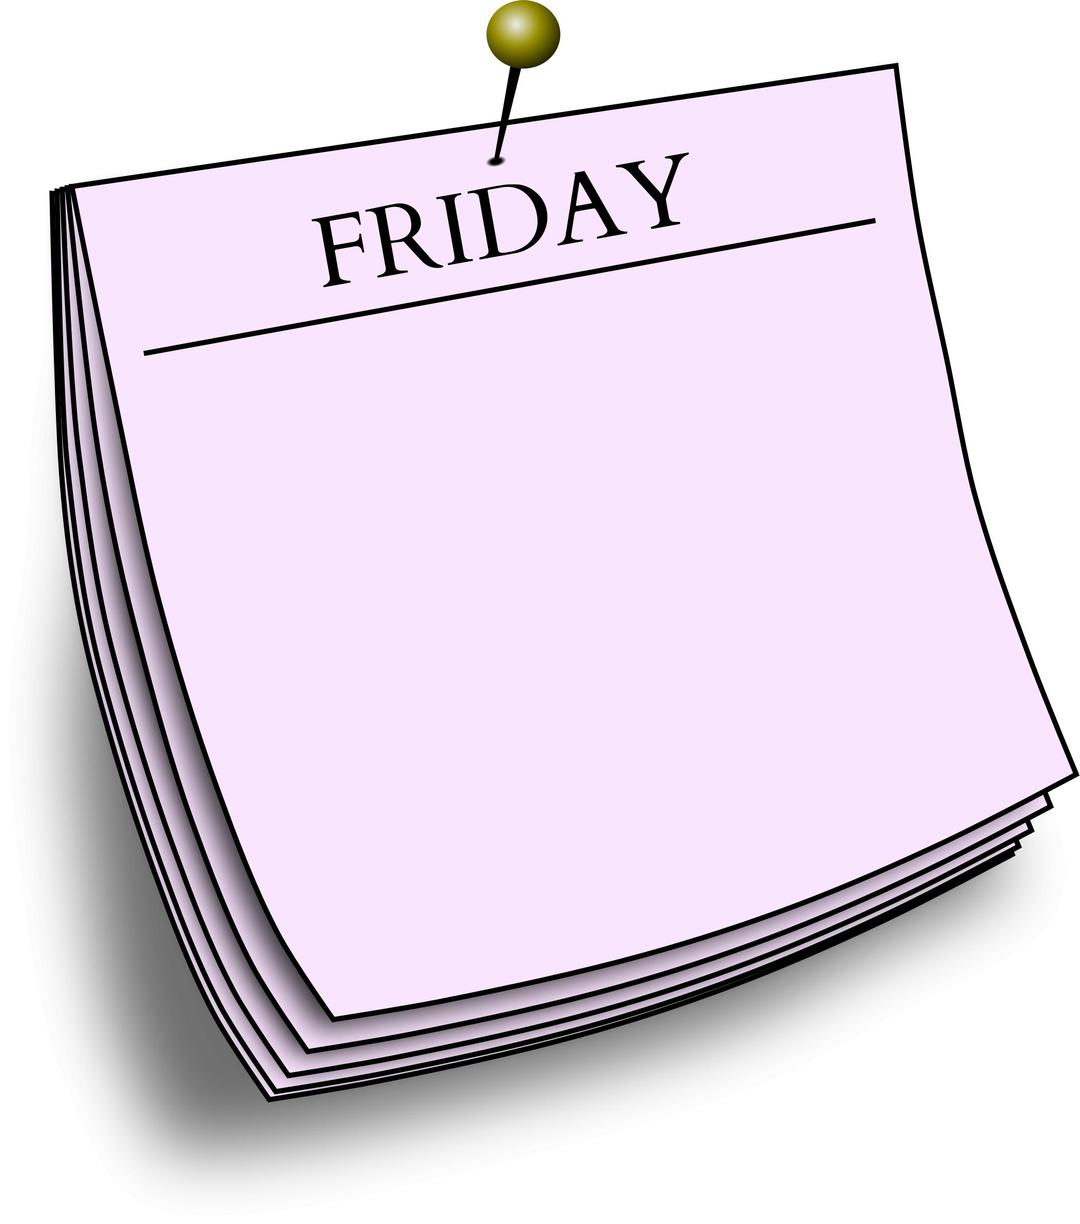 Daily note - Friday png transparent